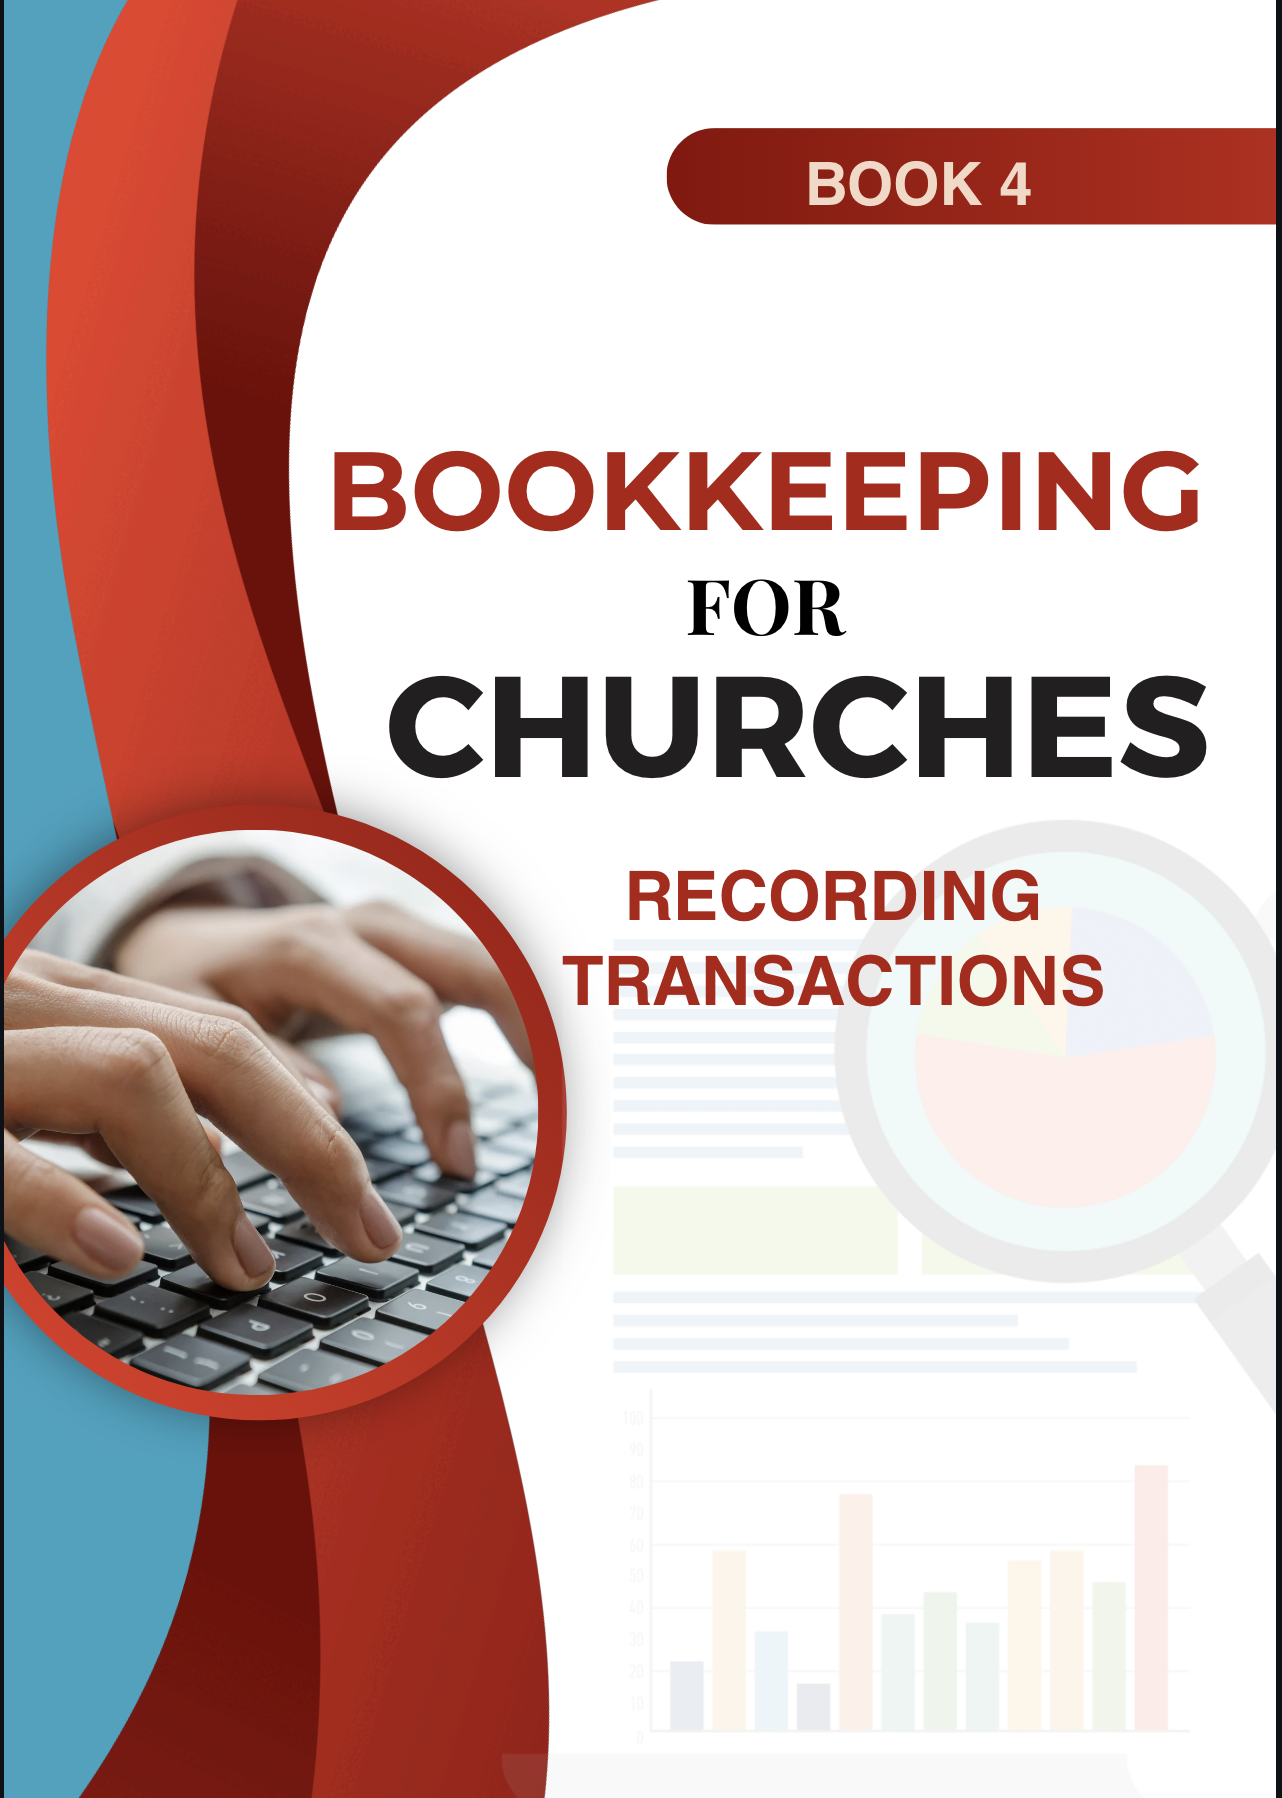 Bookkeeping for Churches Book 4: How to Record Transactions